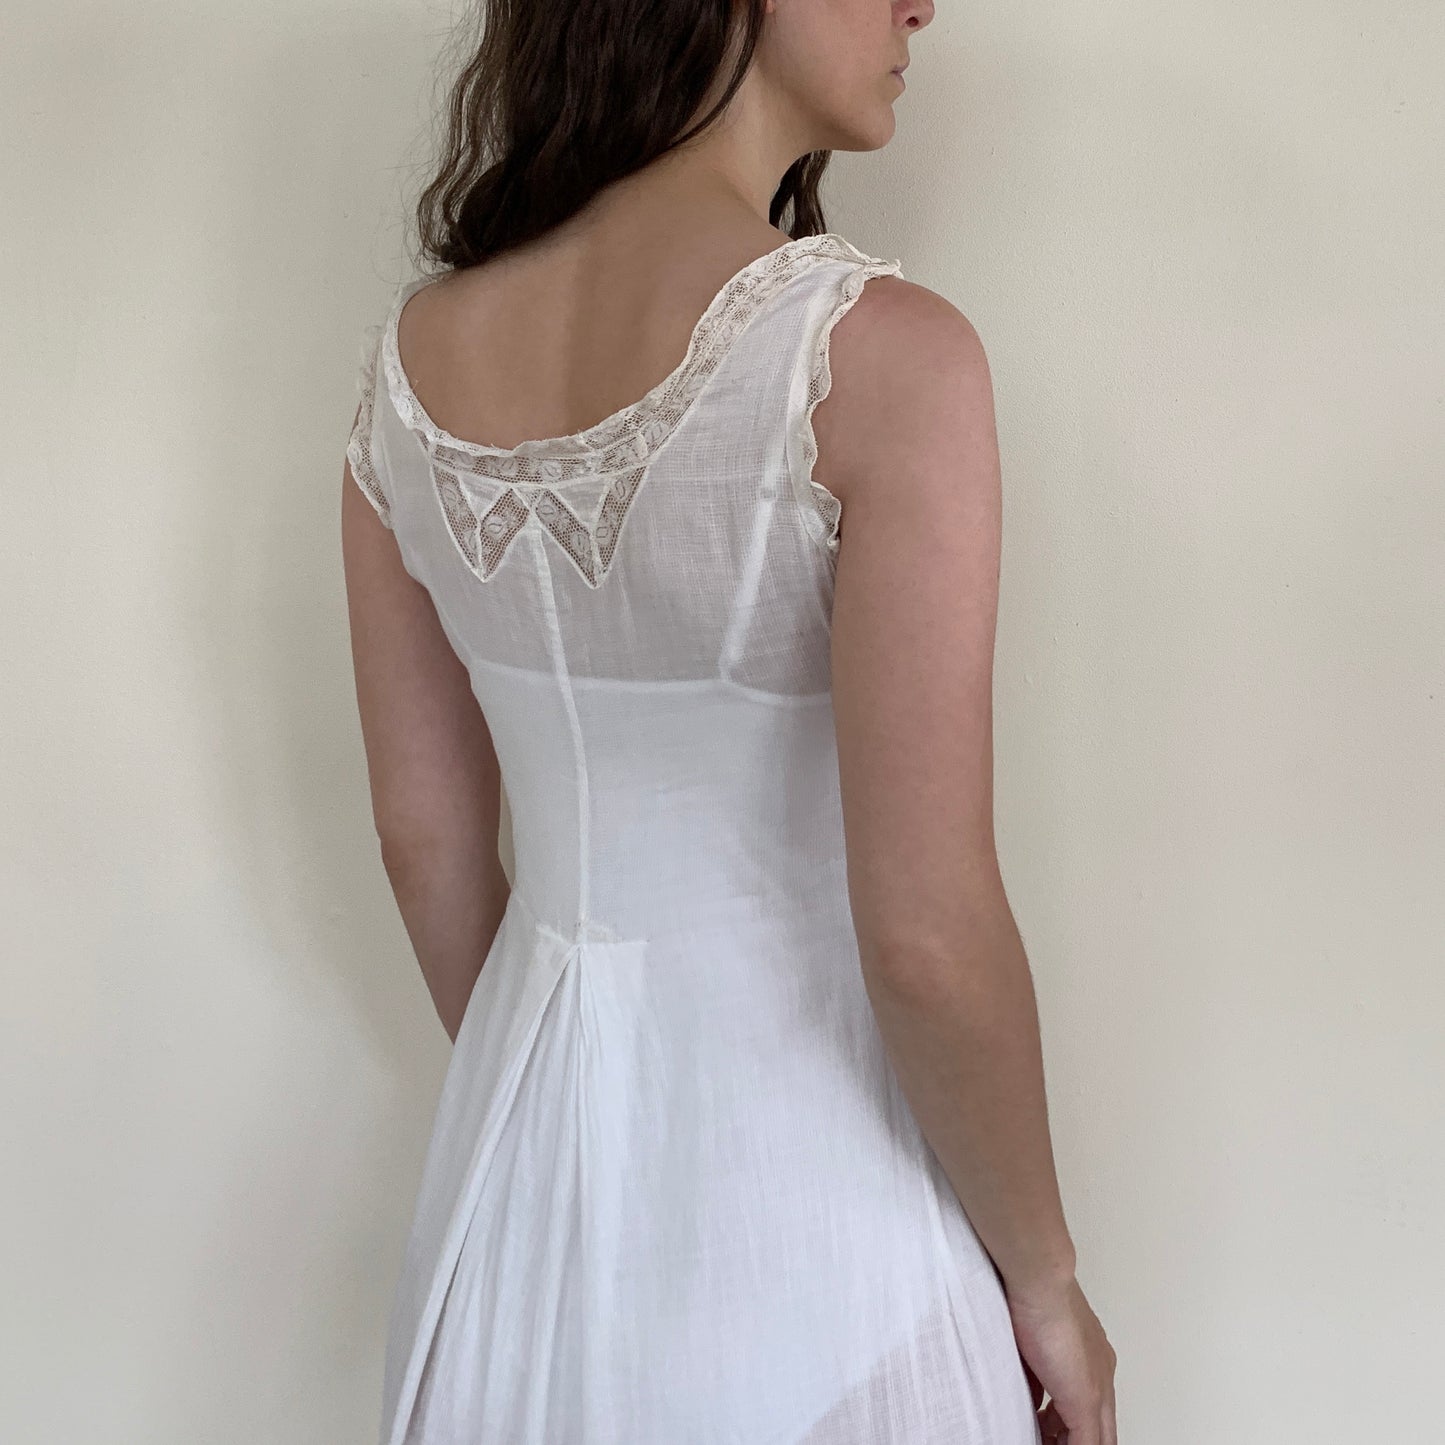 Edwardian princess slip in white cotton with insertion lace trim